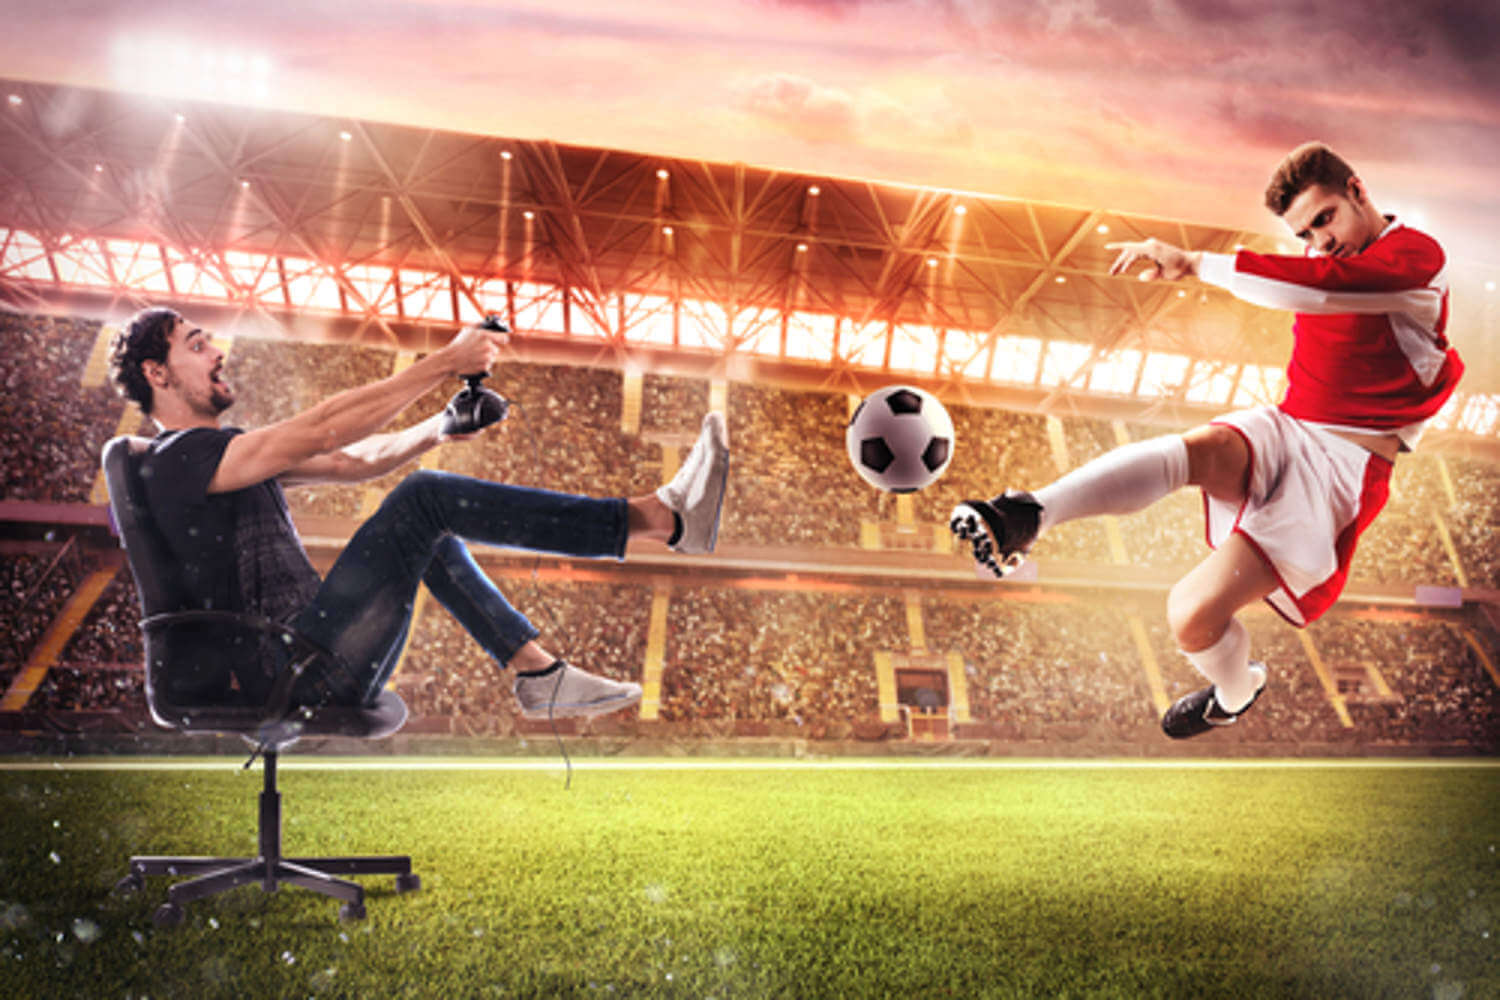 How does live betting work, and what advantages does it offer for sports bettors?